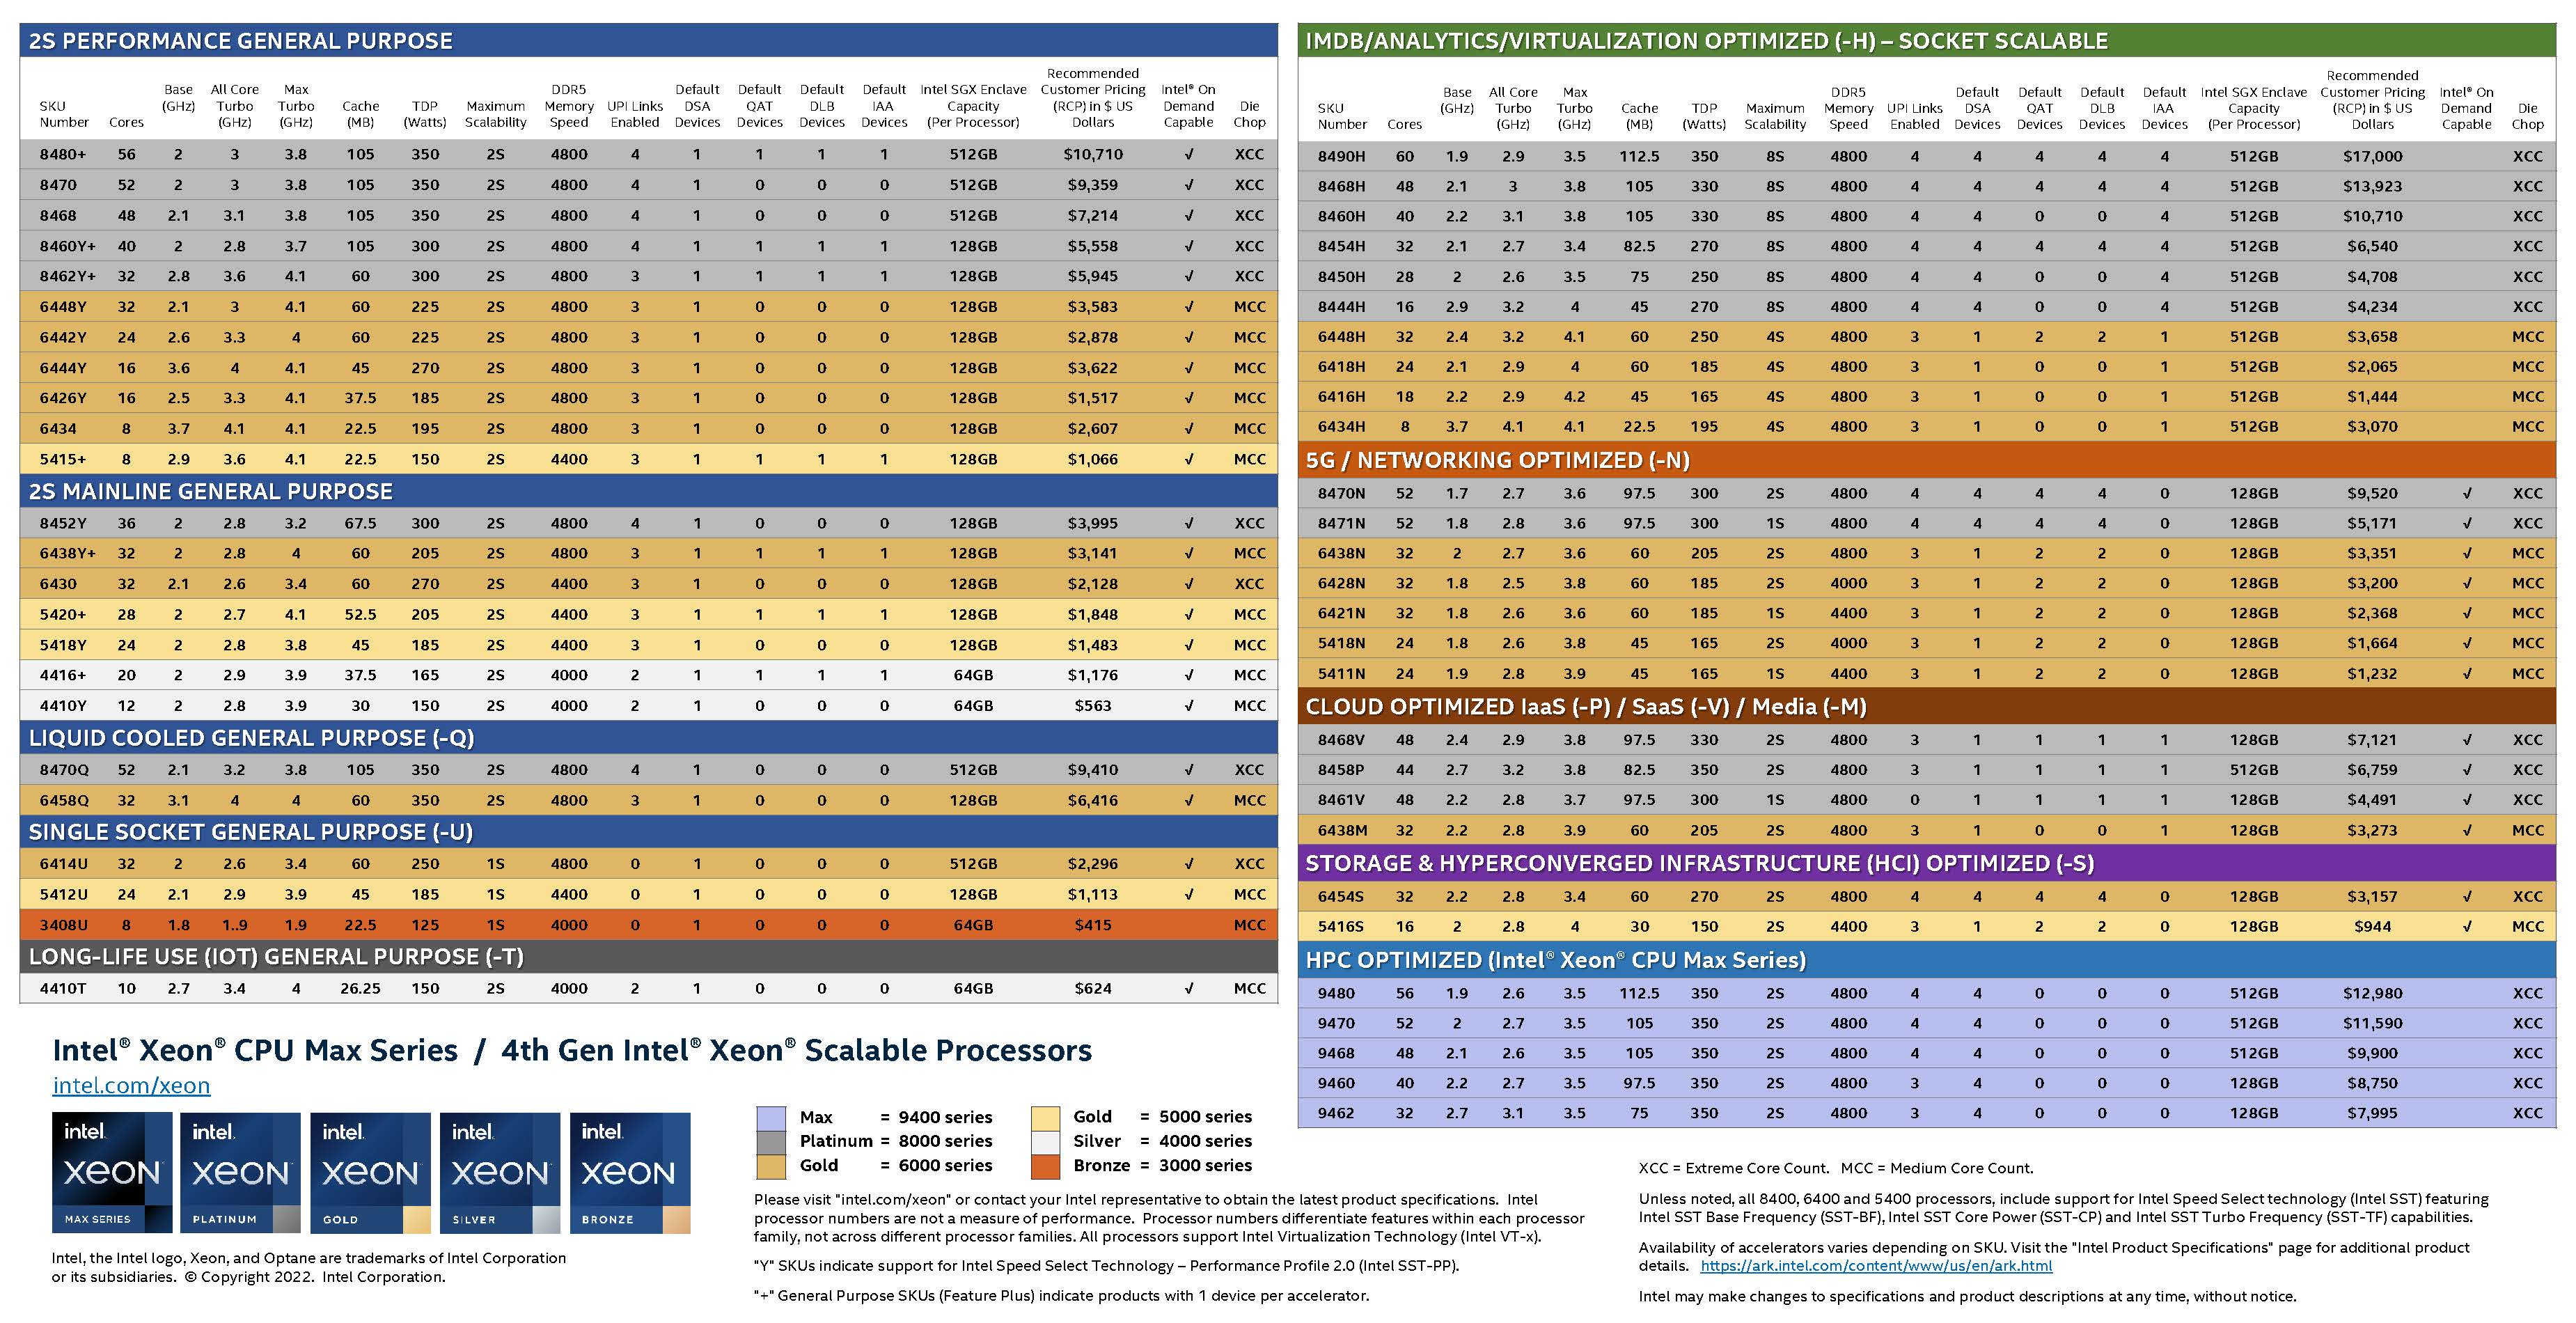 intel xeon scalable and xeon max product SKU stack